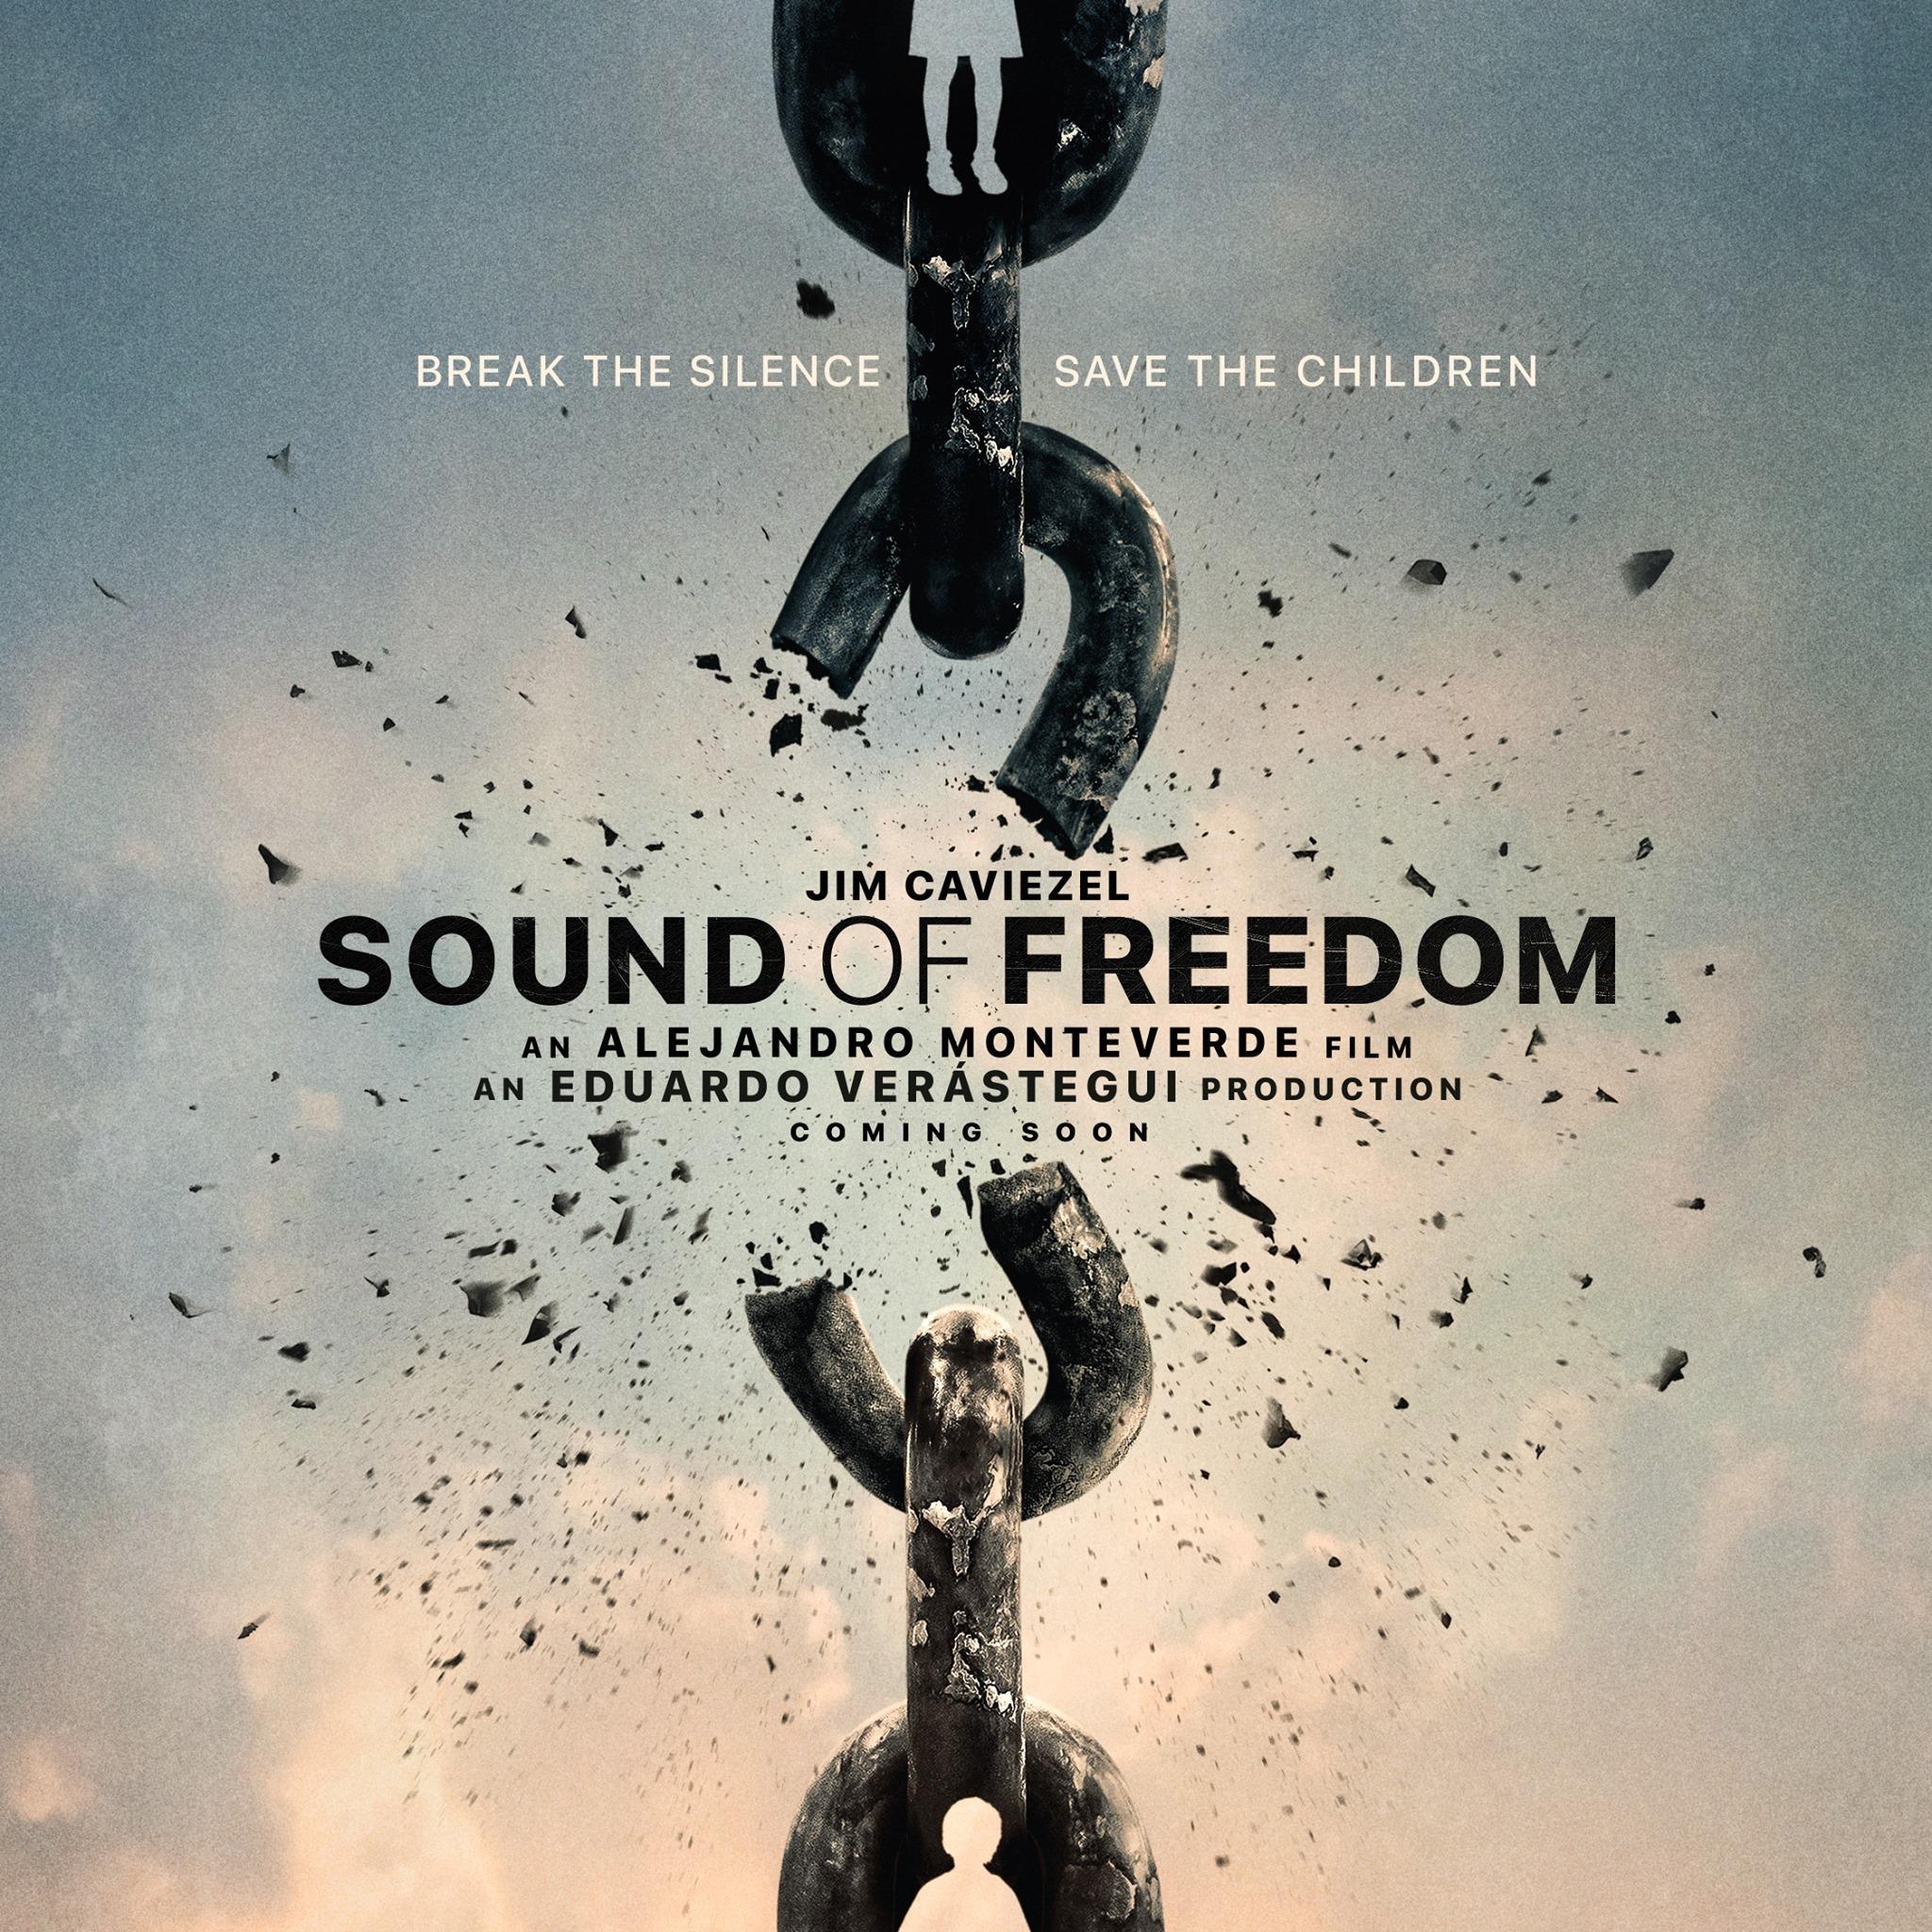 "Sound of Freedom" posted